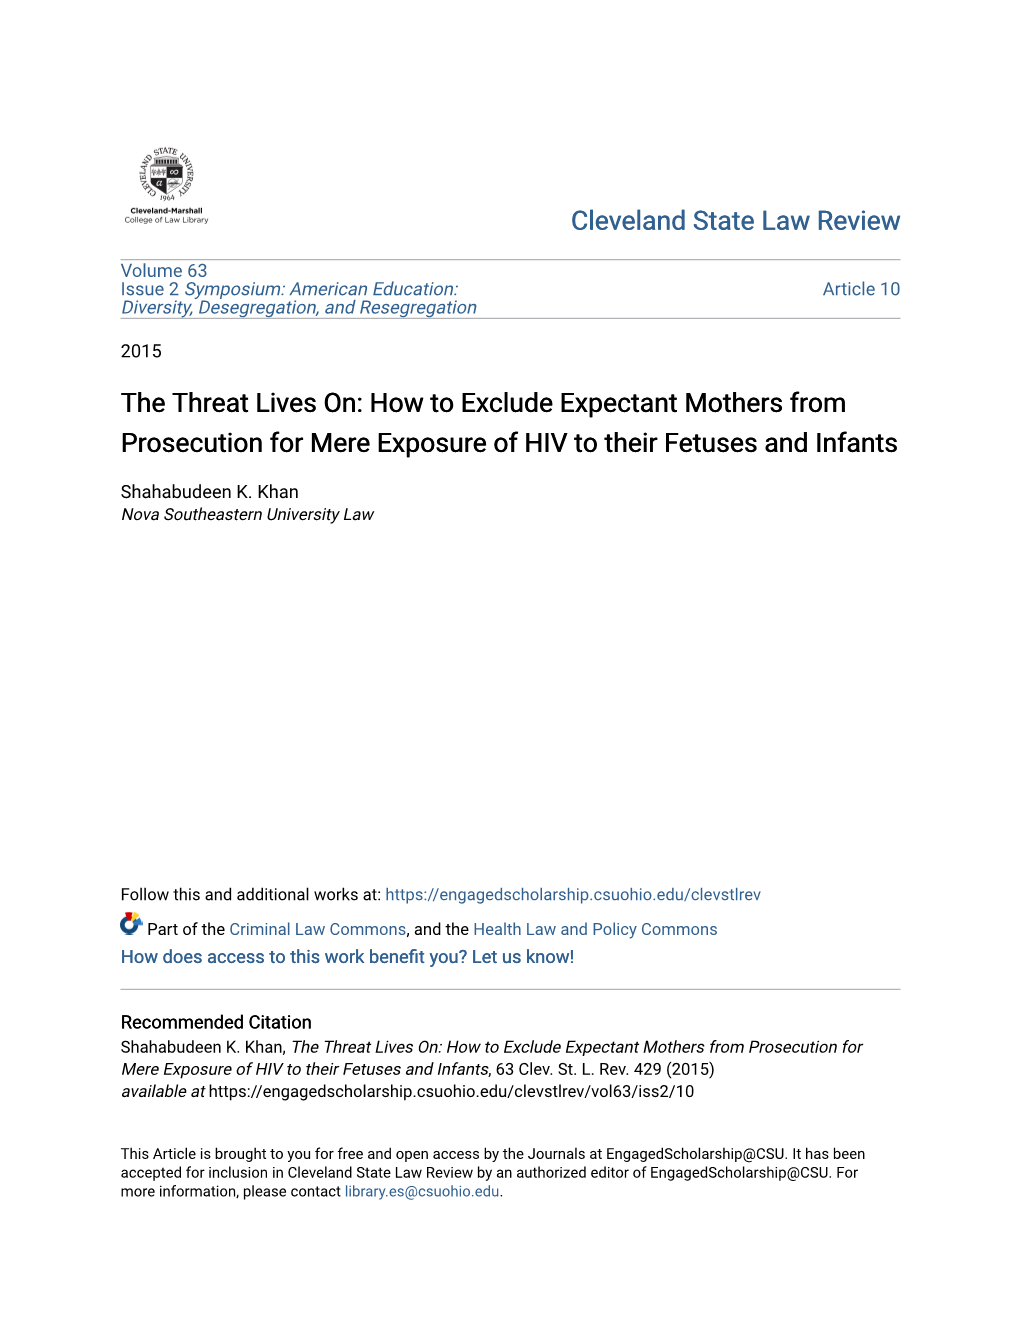 How to Exclude Expectant Mothers from Prosecution for Mere Exposure of HIV to Their Fetuses and Infants